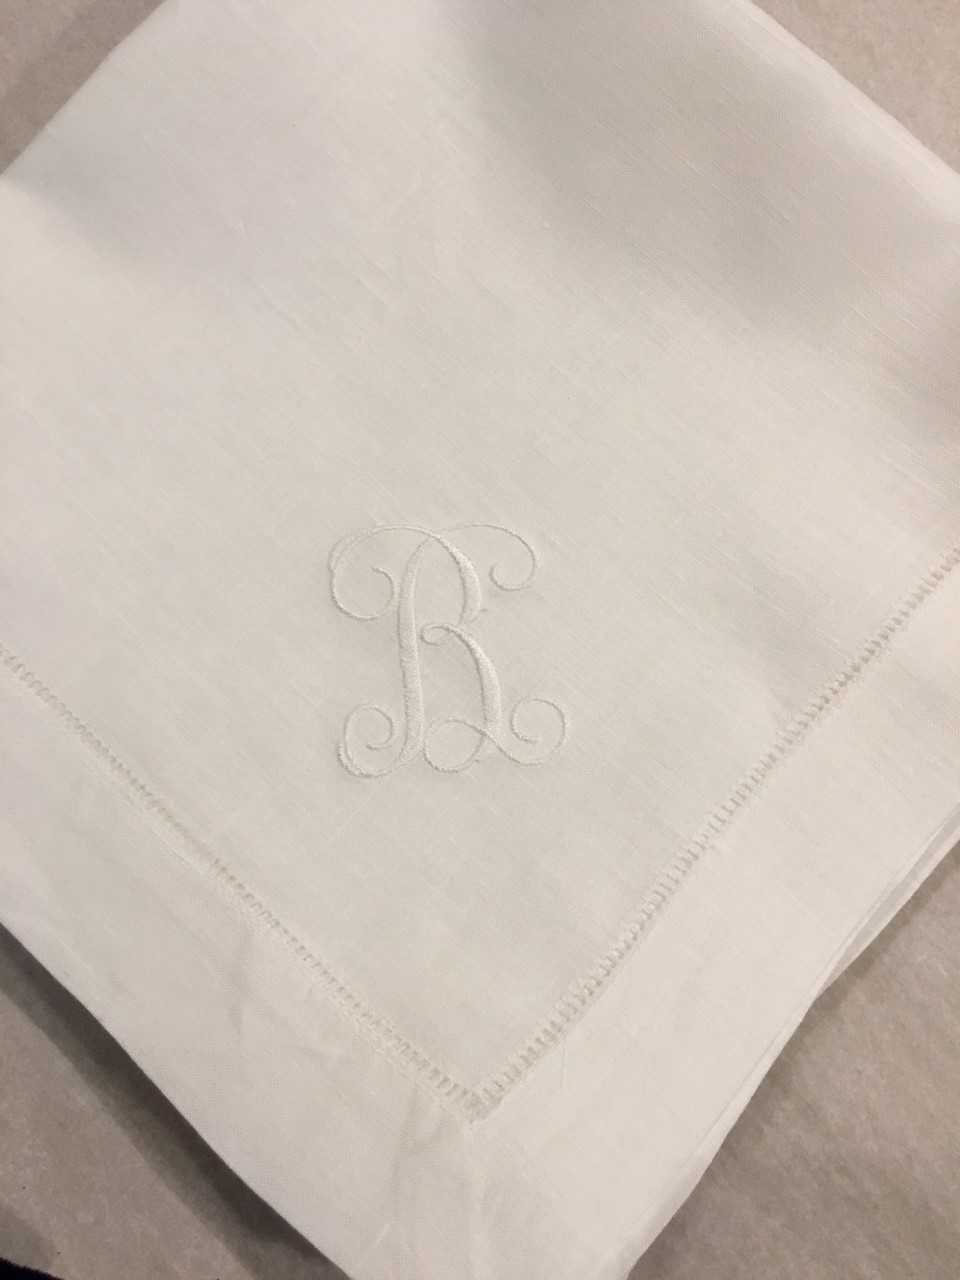 White Linen Napkin, Home Goods, monogrammed by Initially London